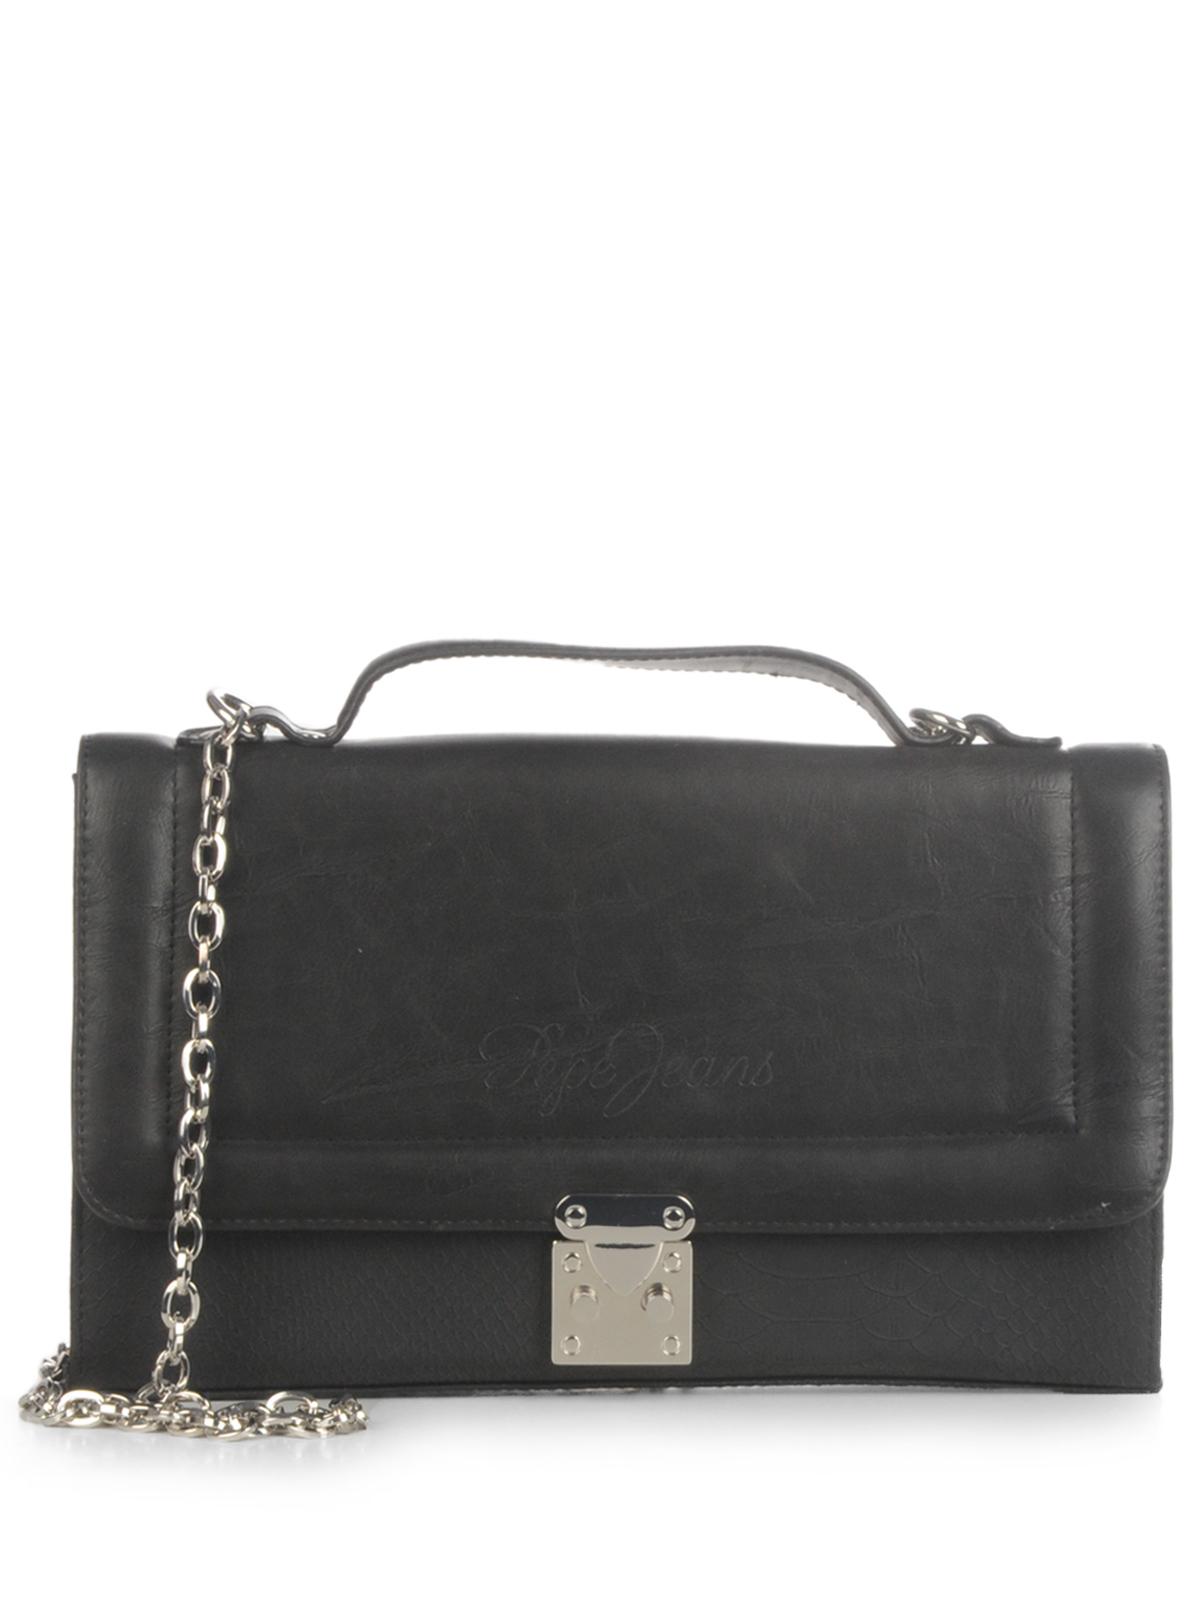 Foto Pepe Jeans Bolso negro ONE SIZE